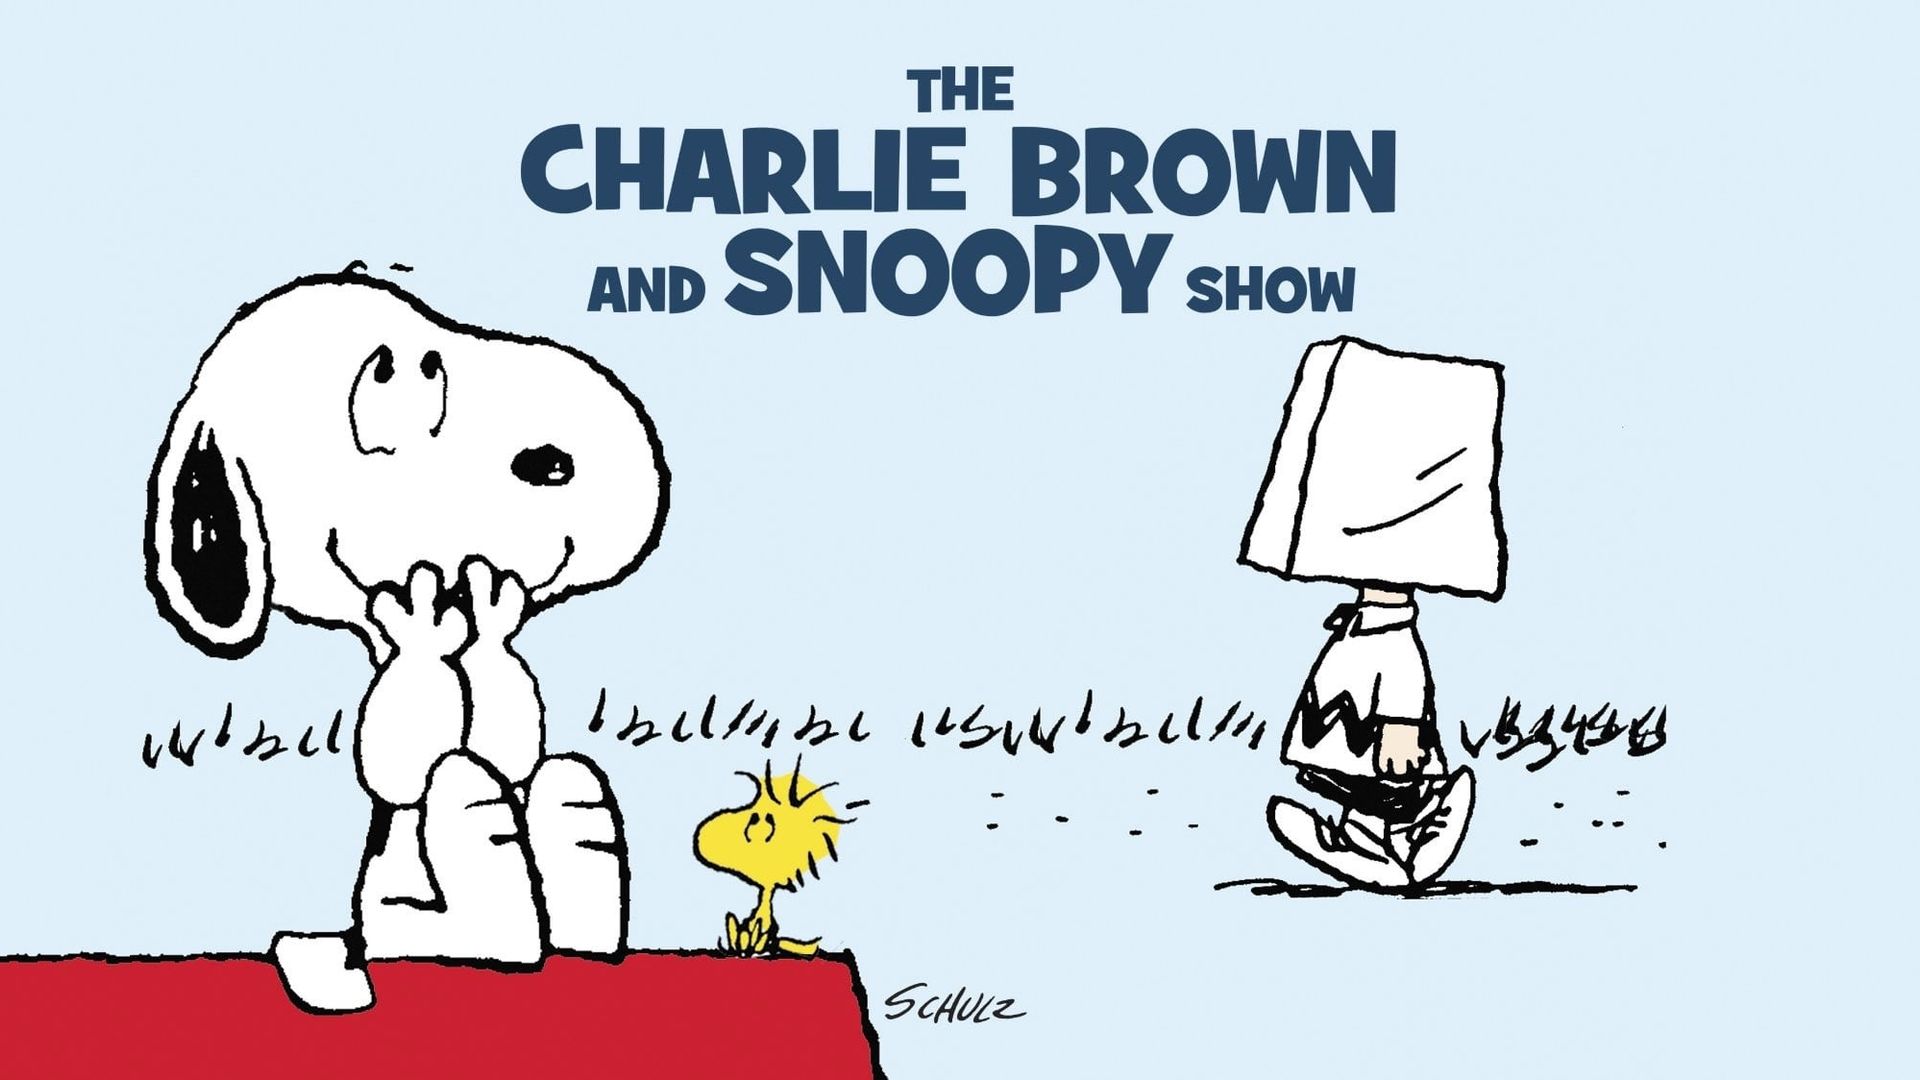 The Charlie Brown and Snoopy Show background